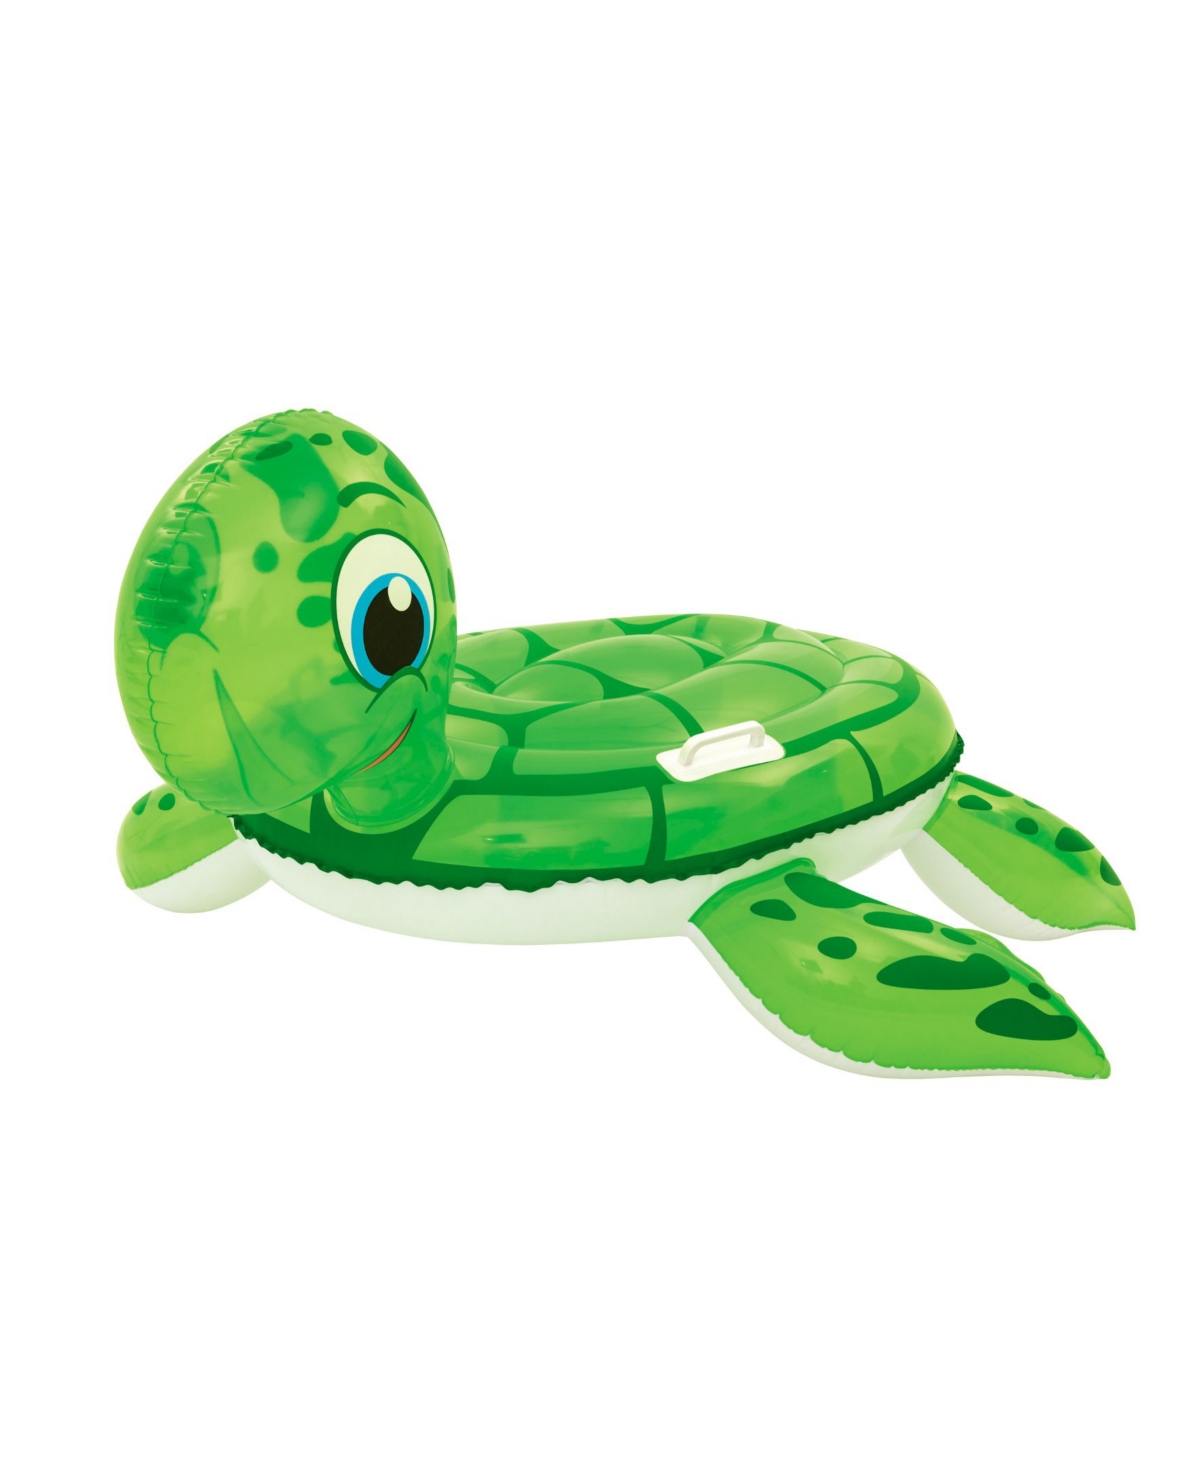 UPC 821808410415 product image for Bestway Turtle Ride on | upcitemdb.com